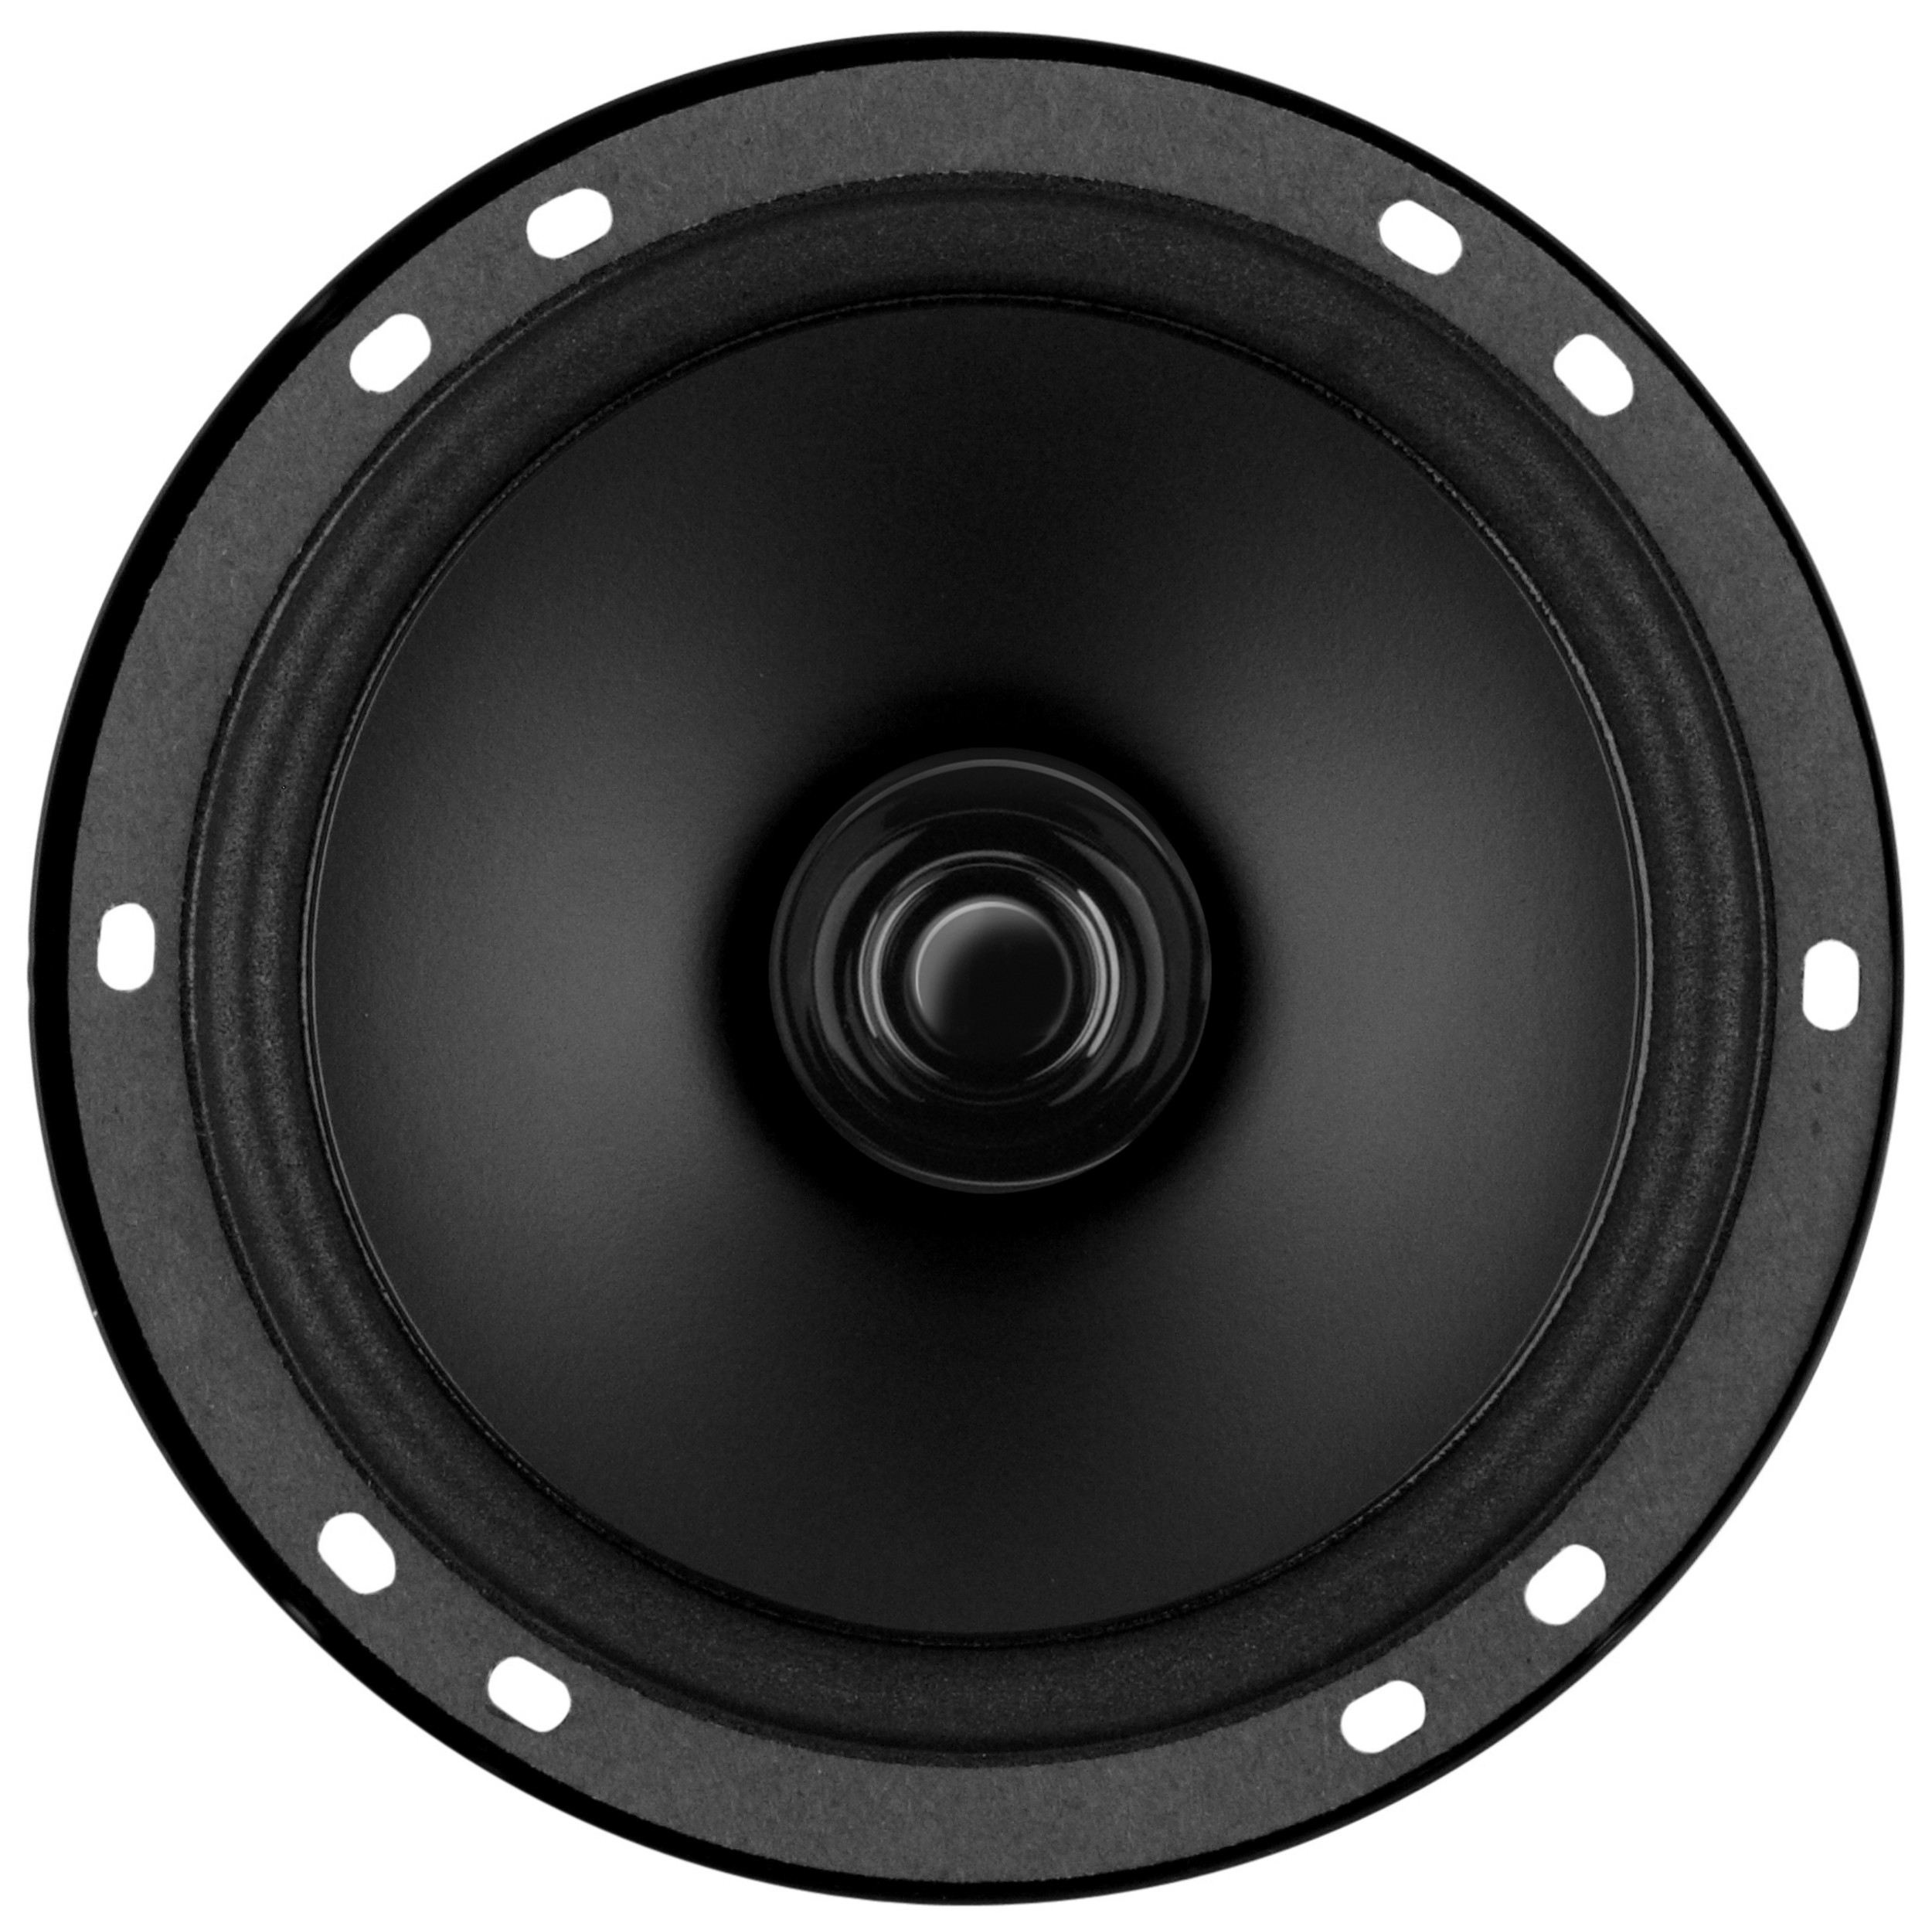 BOSS Audio Systems BRS65 6.5” Replacement Car Speaker, 80 Watts, Full Range - image 3 of 11